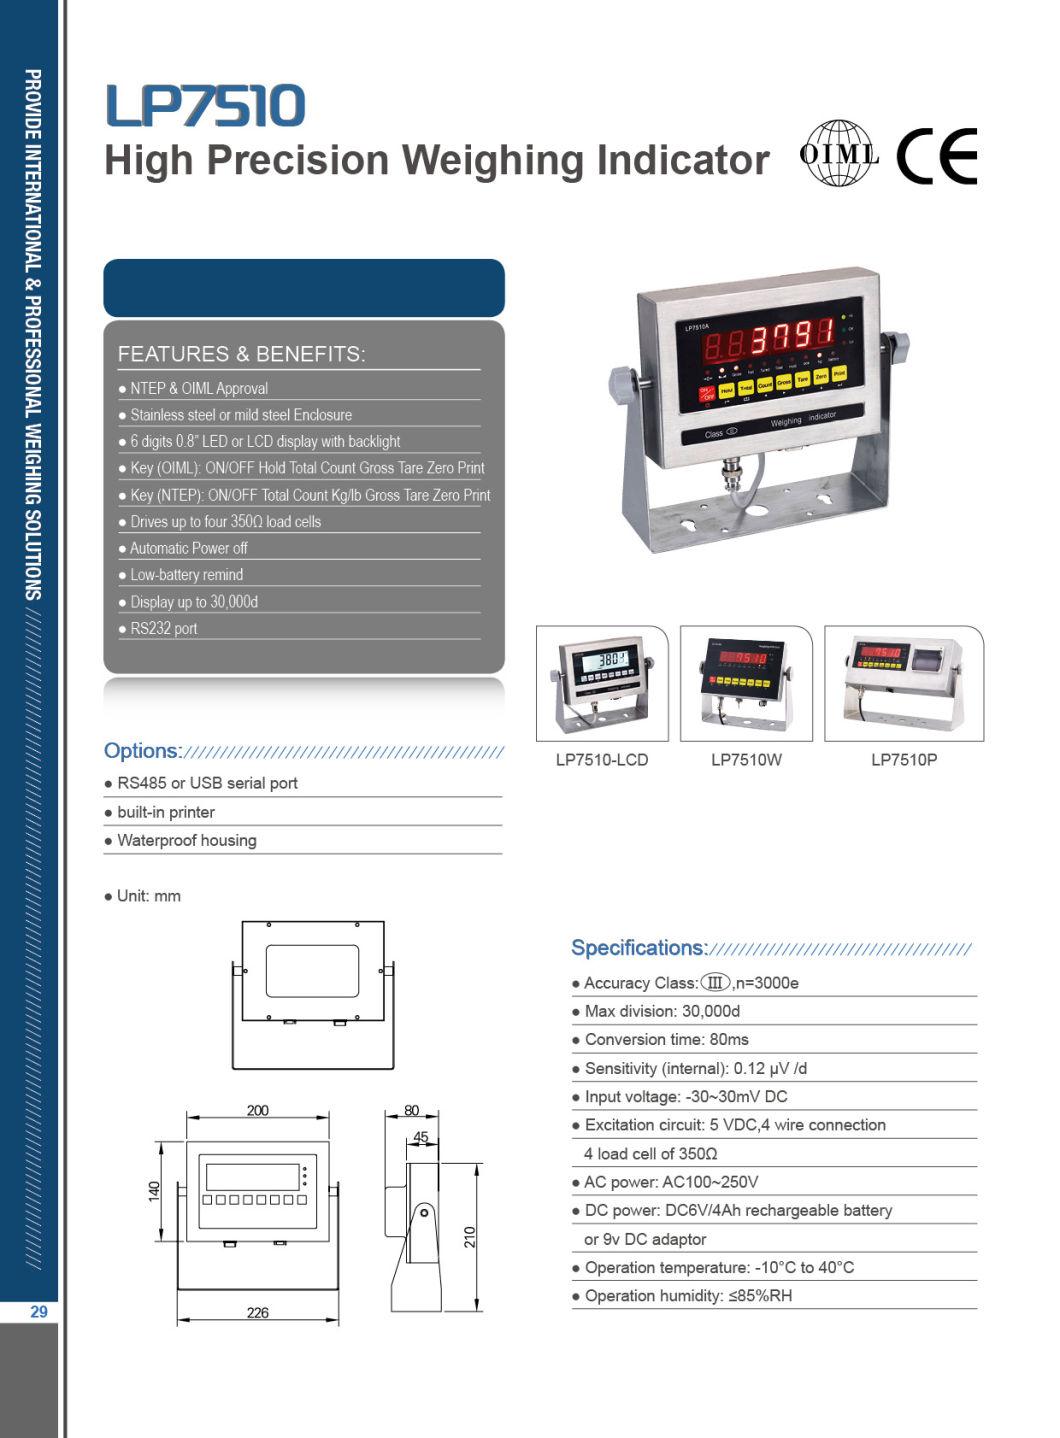 China Professional Manufacture Electronic Weighing Indicator